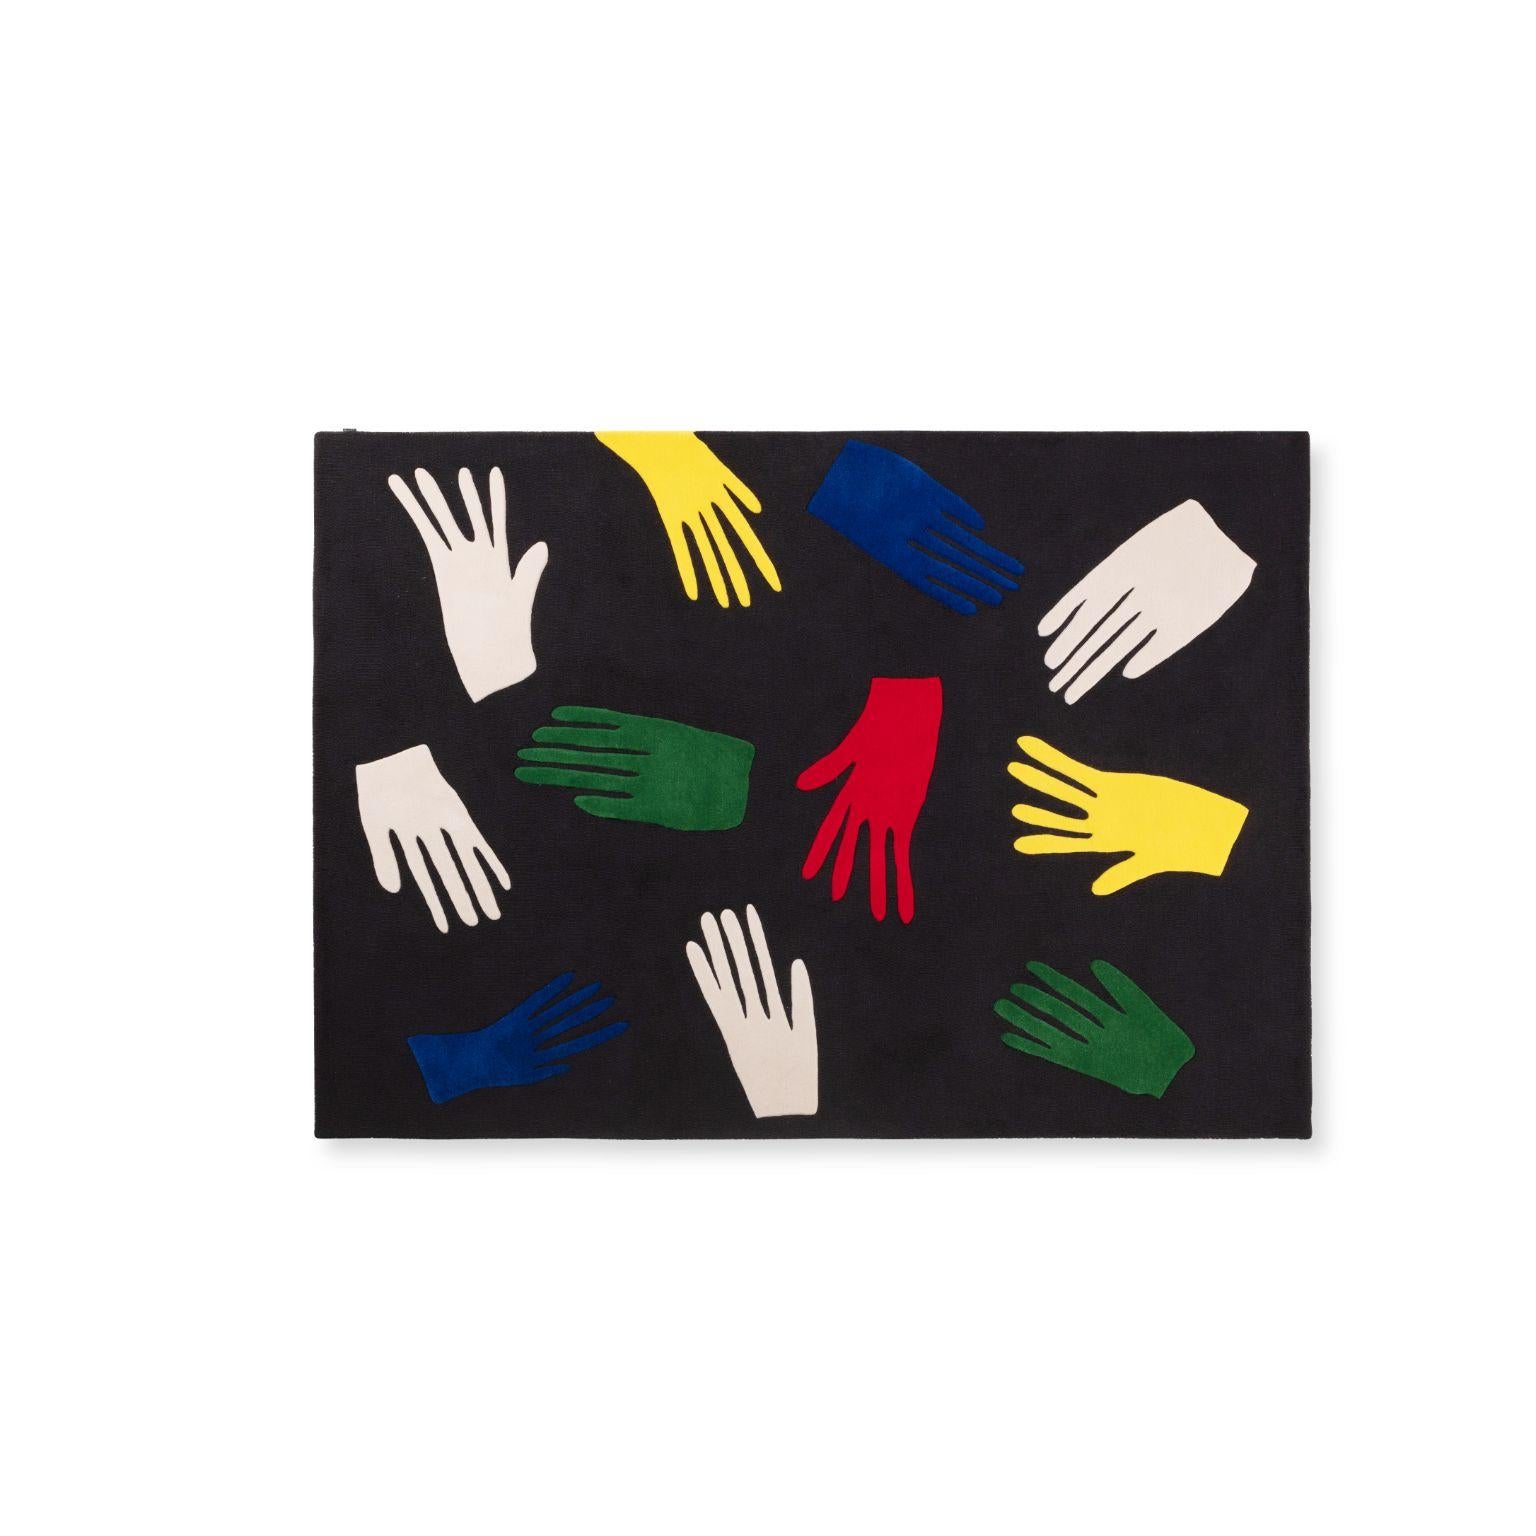 French Color Wave Rug by Jean-Charles de Castelbajac